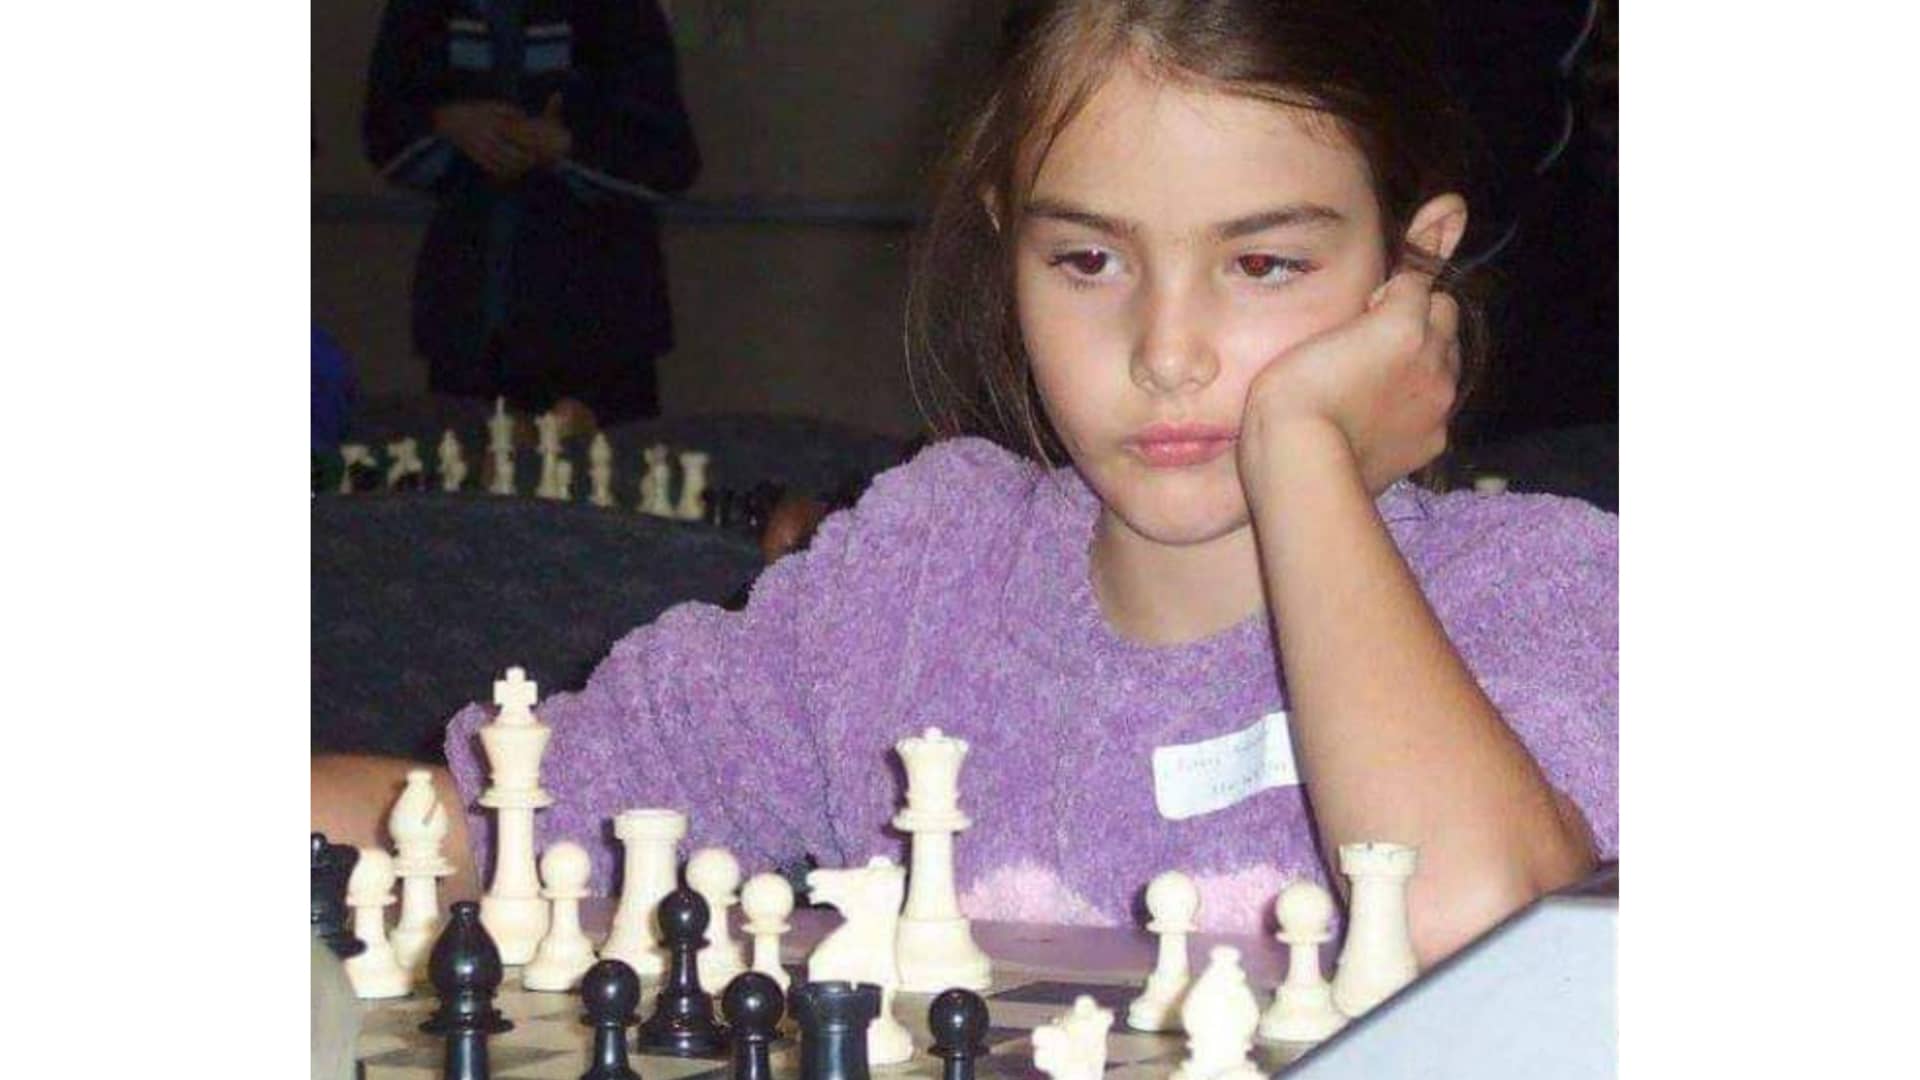 Alexandra Botez started playing chess at six years old